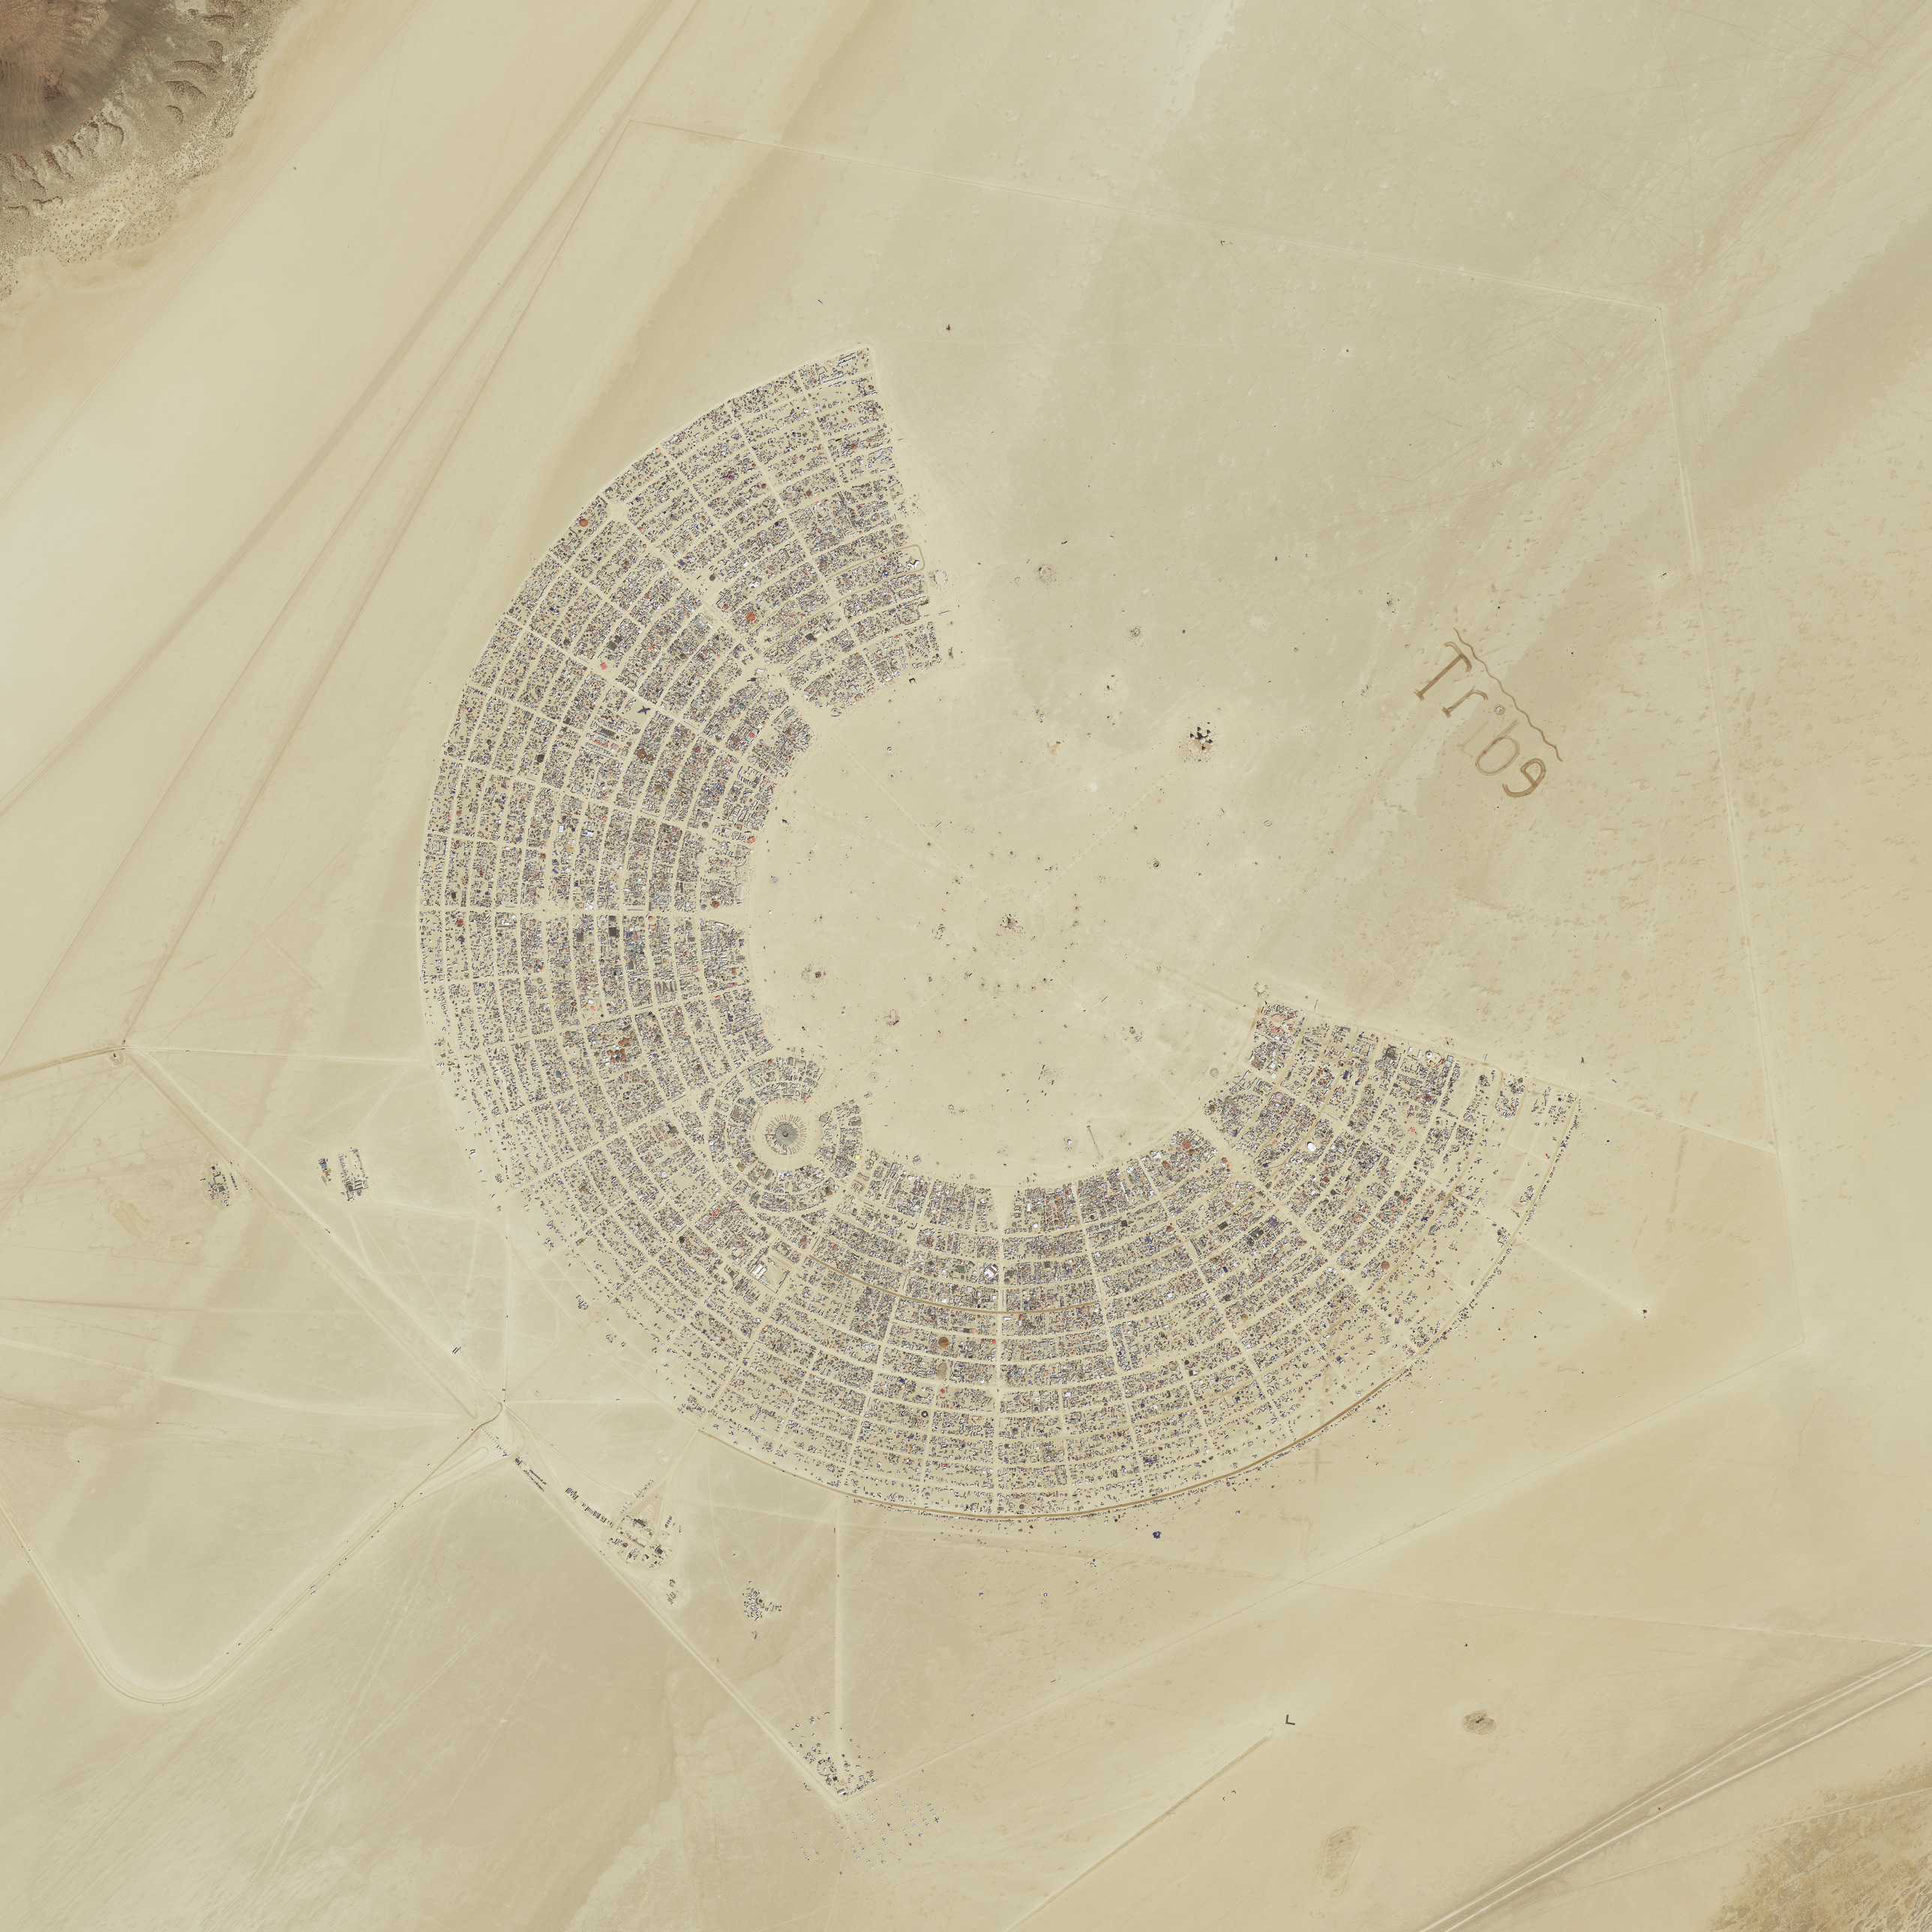 Burning Man 2011 from above